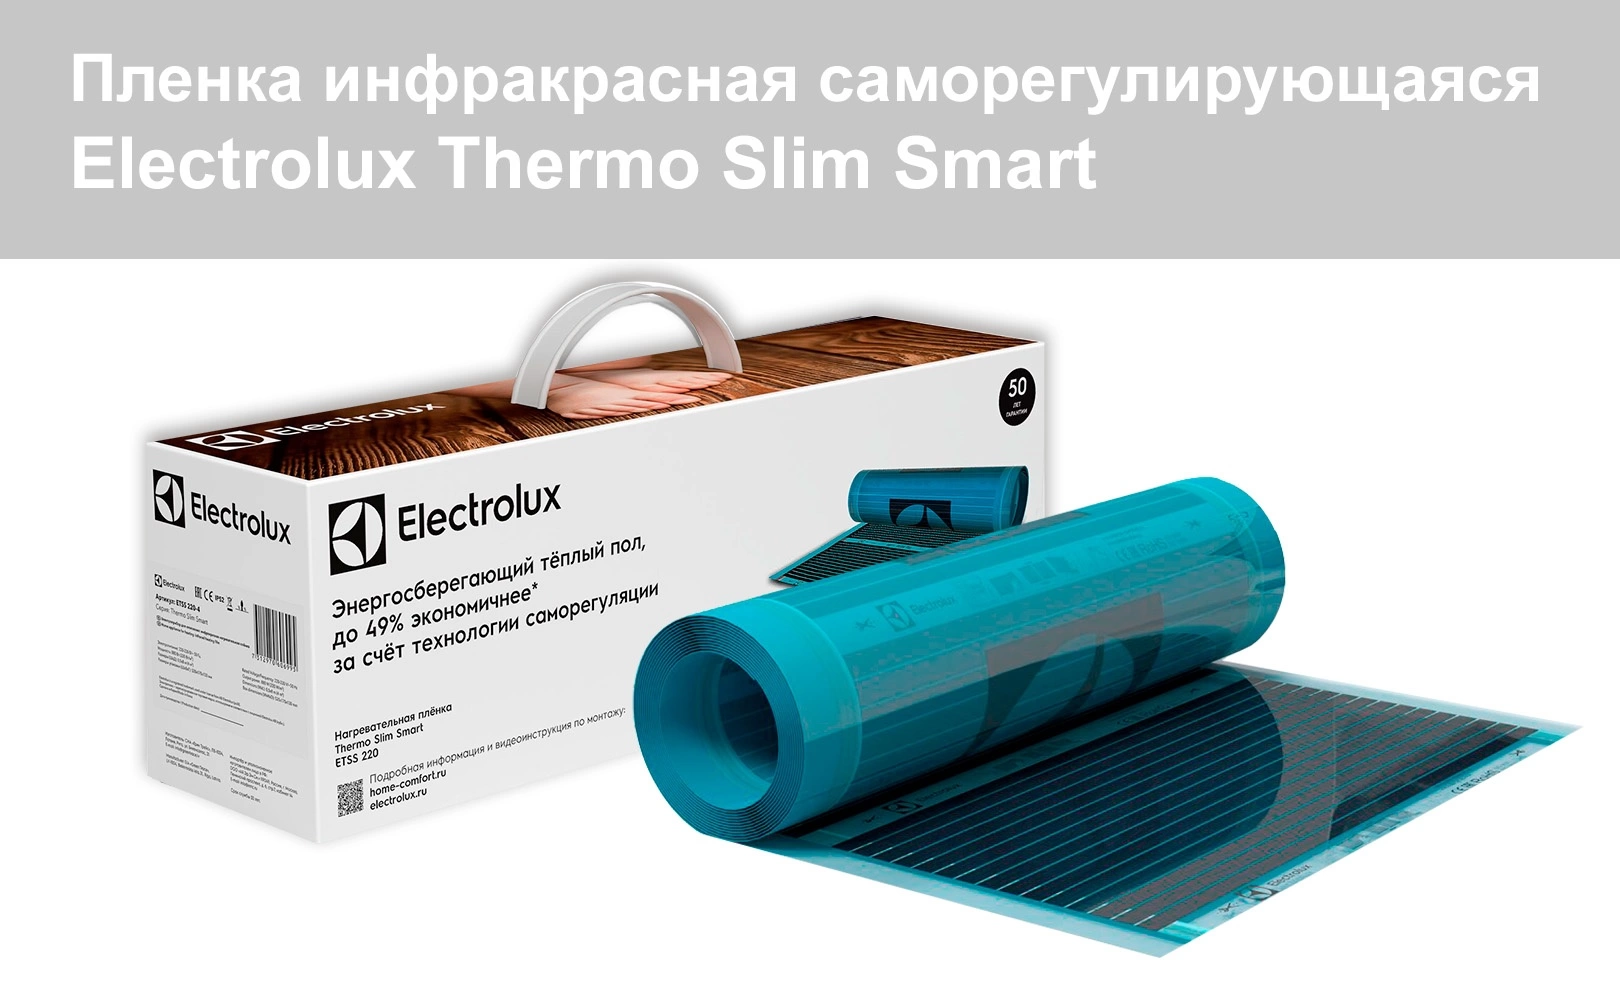 Electrolux Thermo Slim Smart 